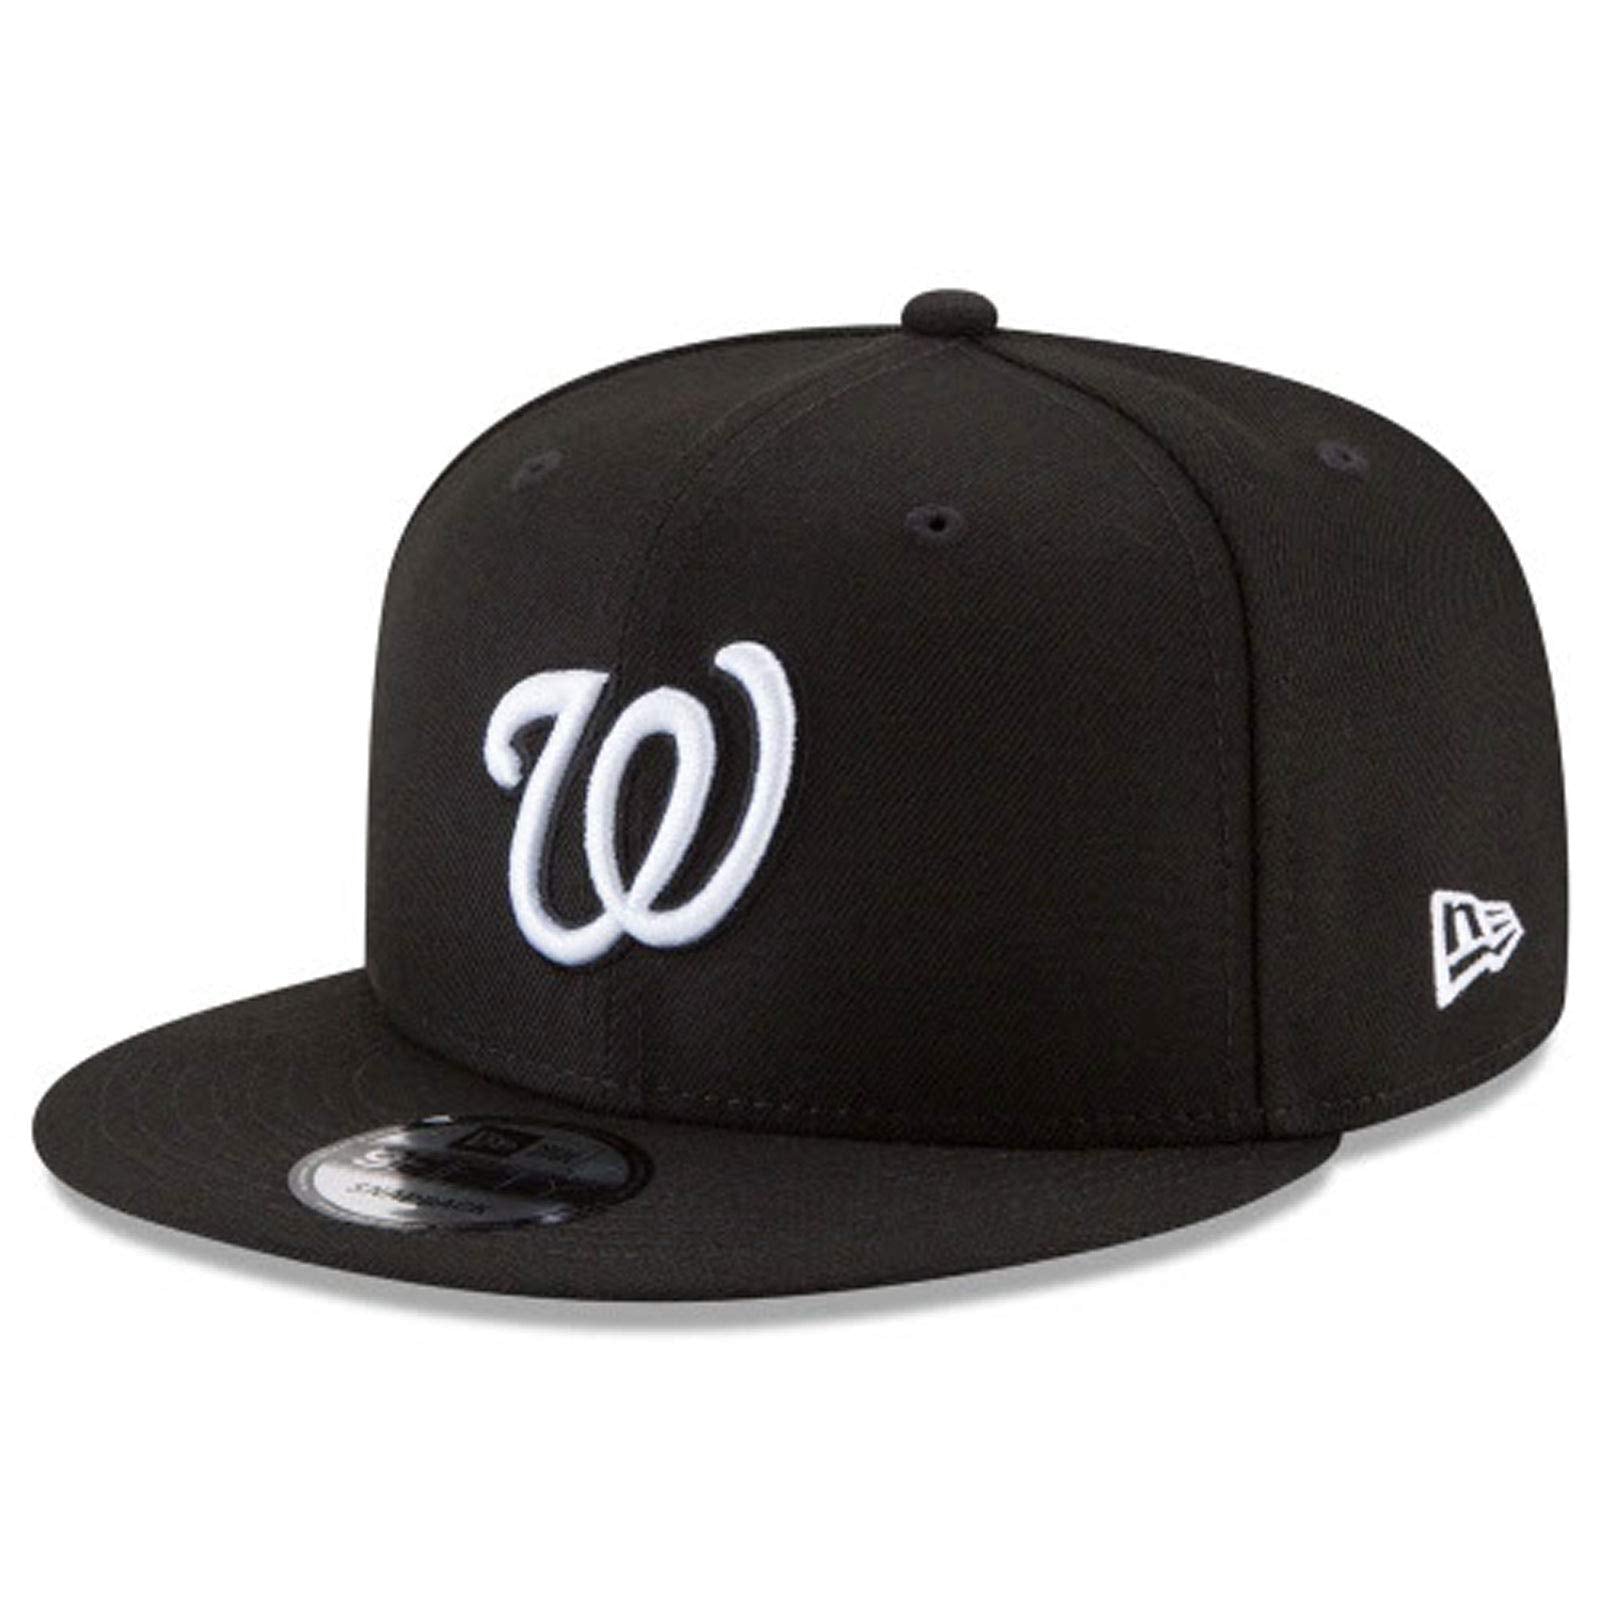 New Era MLB Basic SNAP 950 Washington Nationals Black White Snapback - Caps Fitted Caps Fitted Default Title Caps